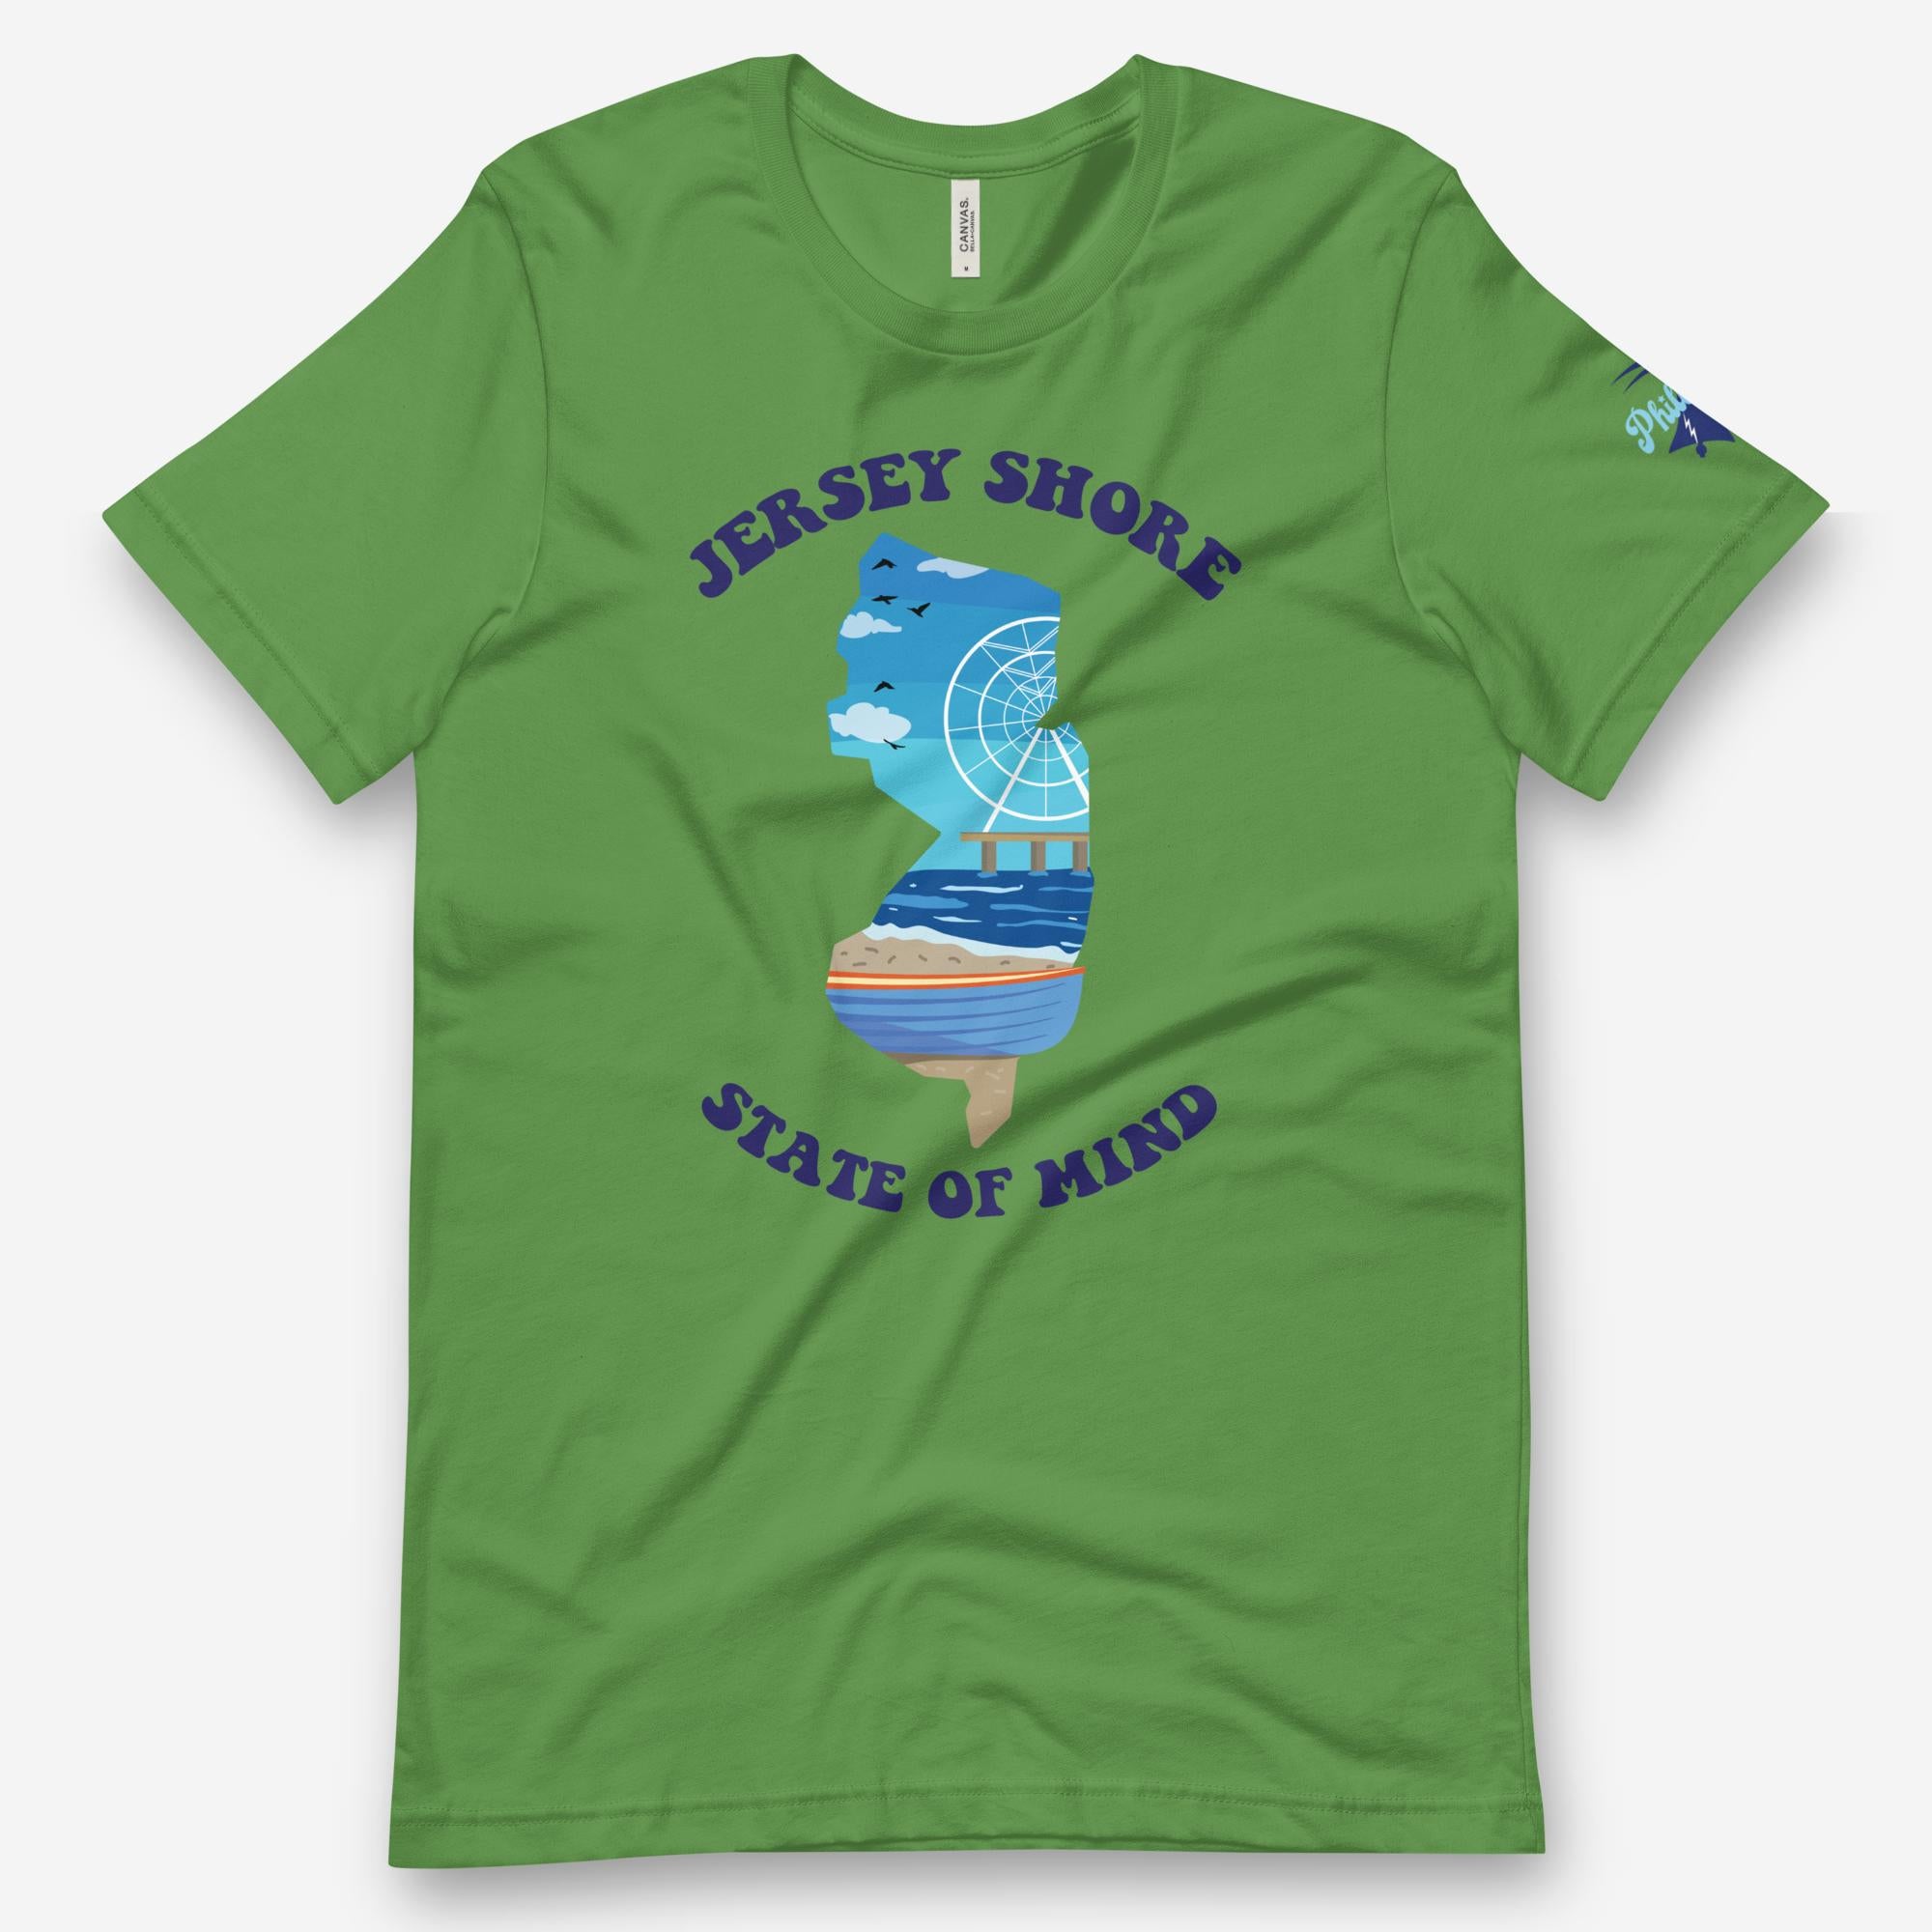 "Jersey Shore State of Mind" Tee